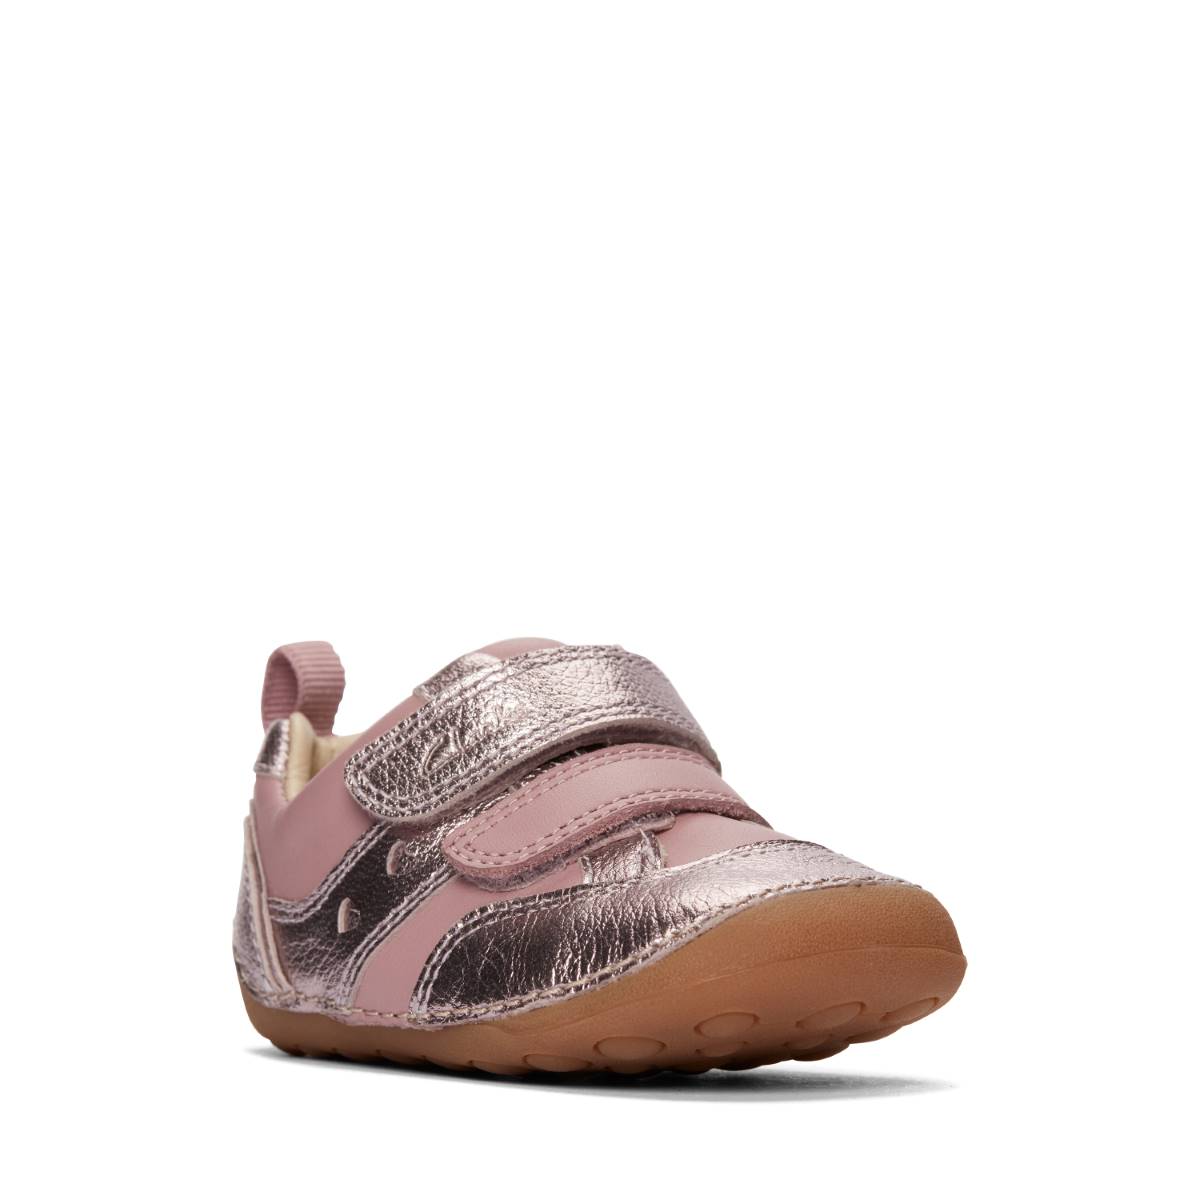 Clarks Tiny Sky T Blush Pink Kids girls first and baby shoes 7528-16F in a Plain Leather in Size 4